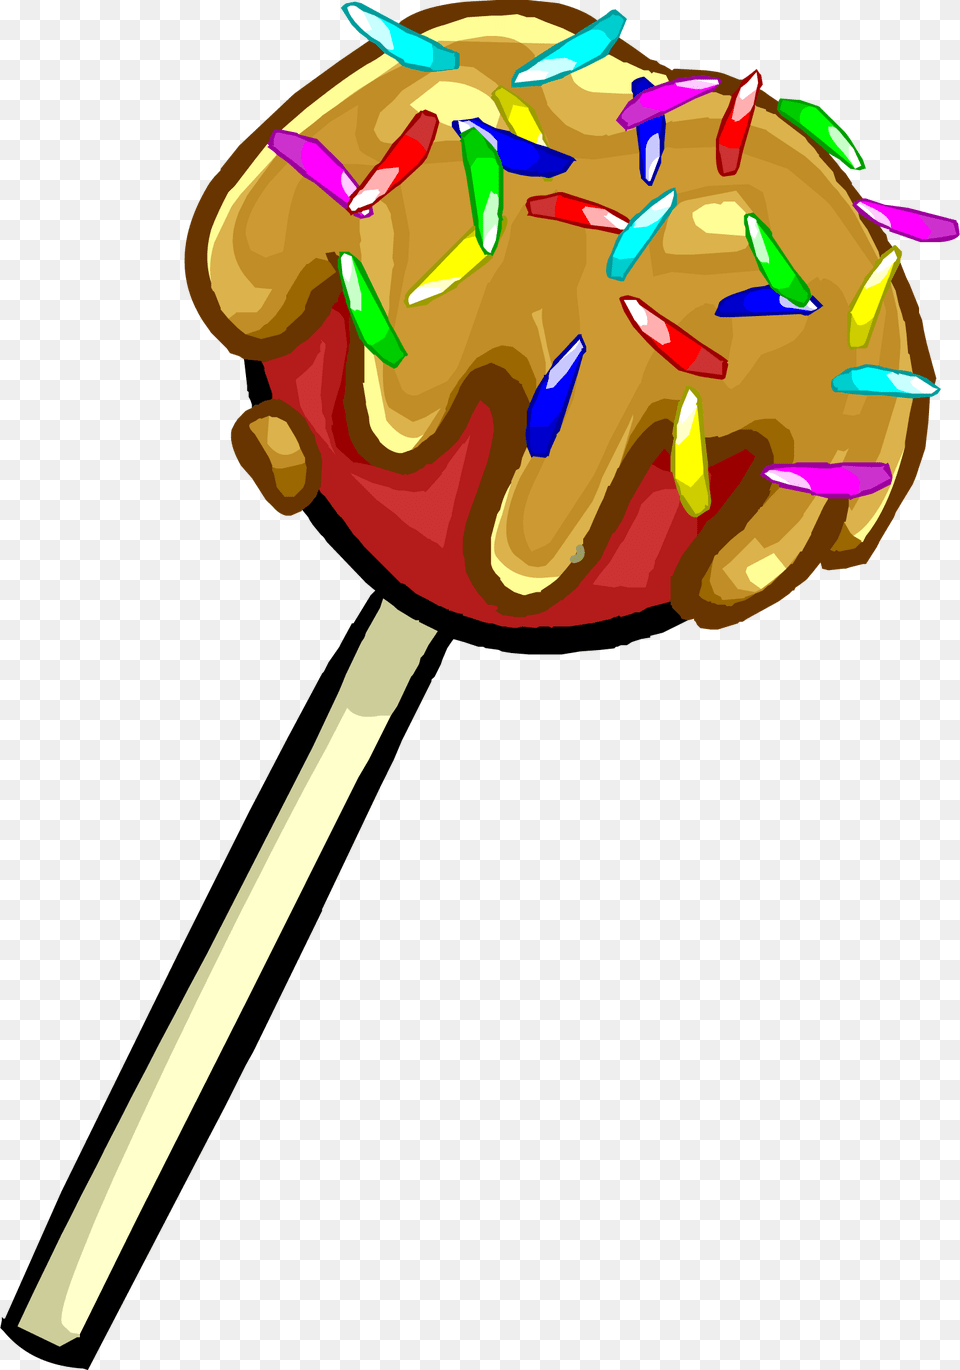 Candy Apple Icon Club Penguin Candy Apple, Food, Sweets, Lollipop Png